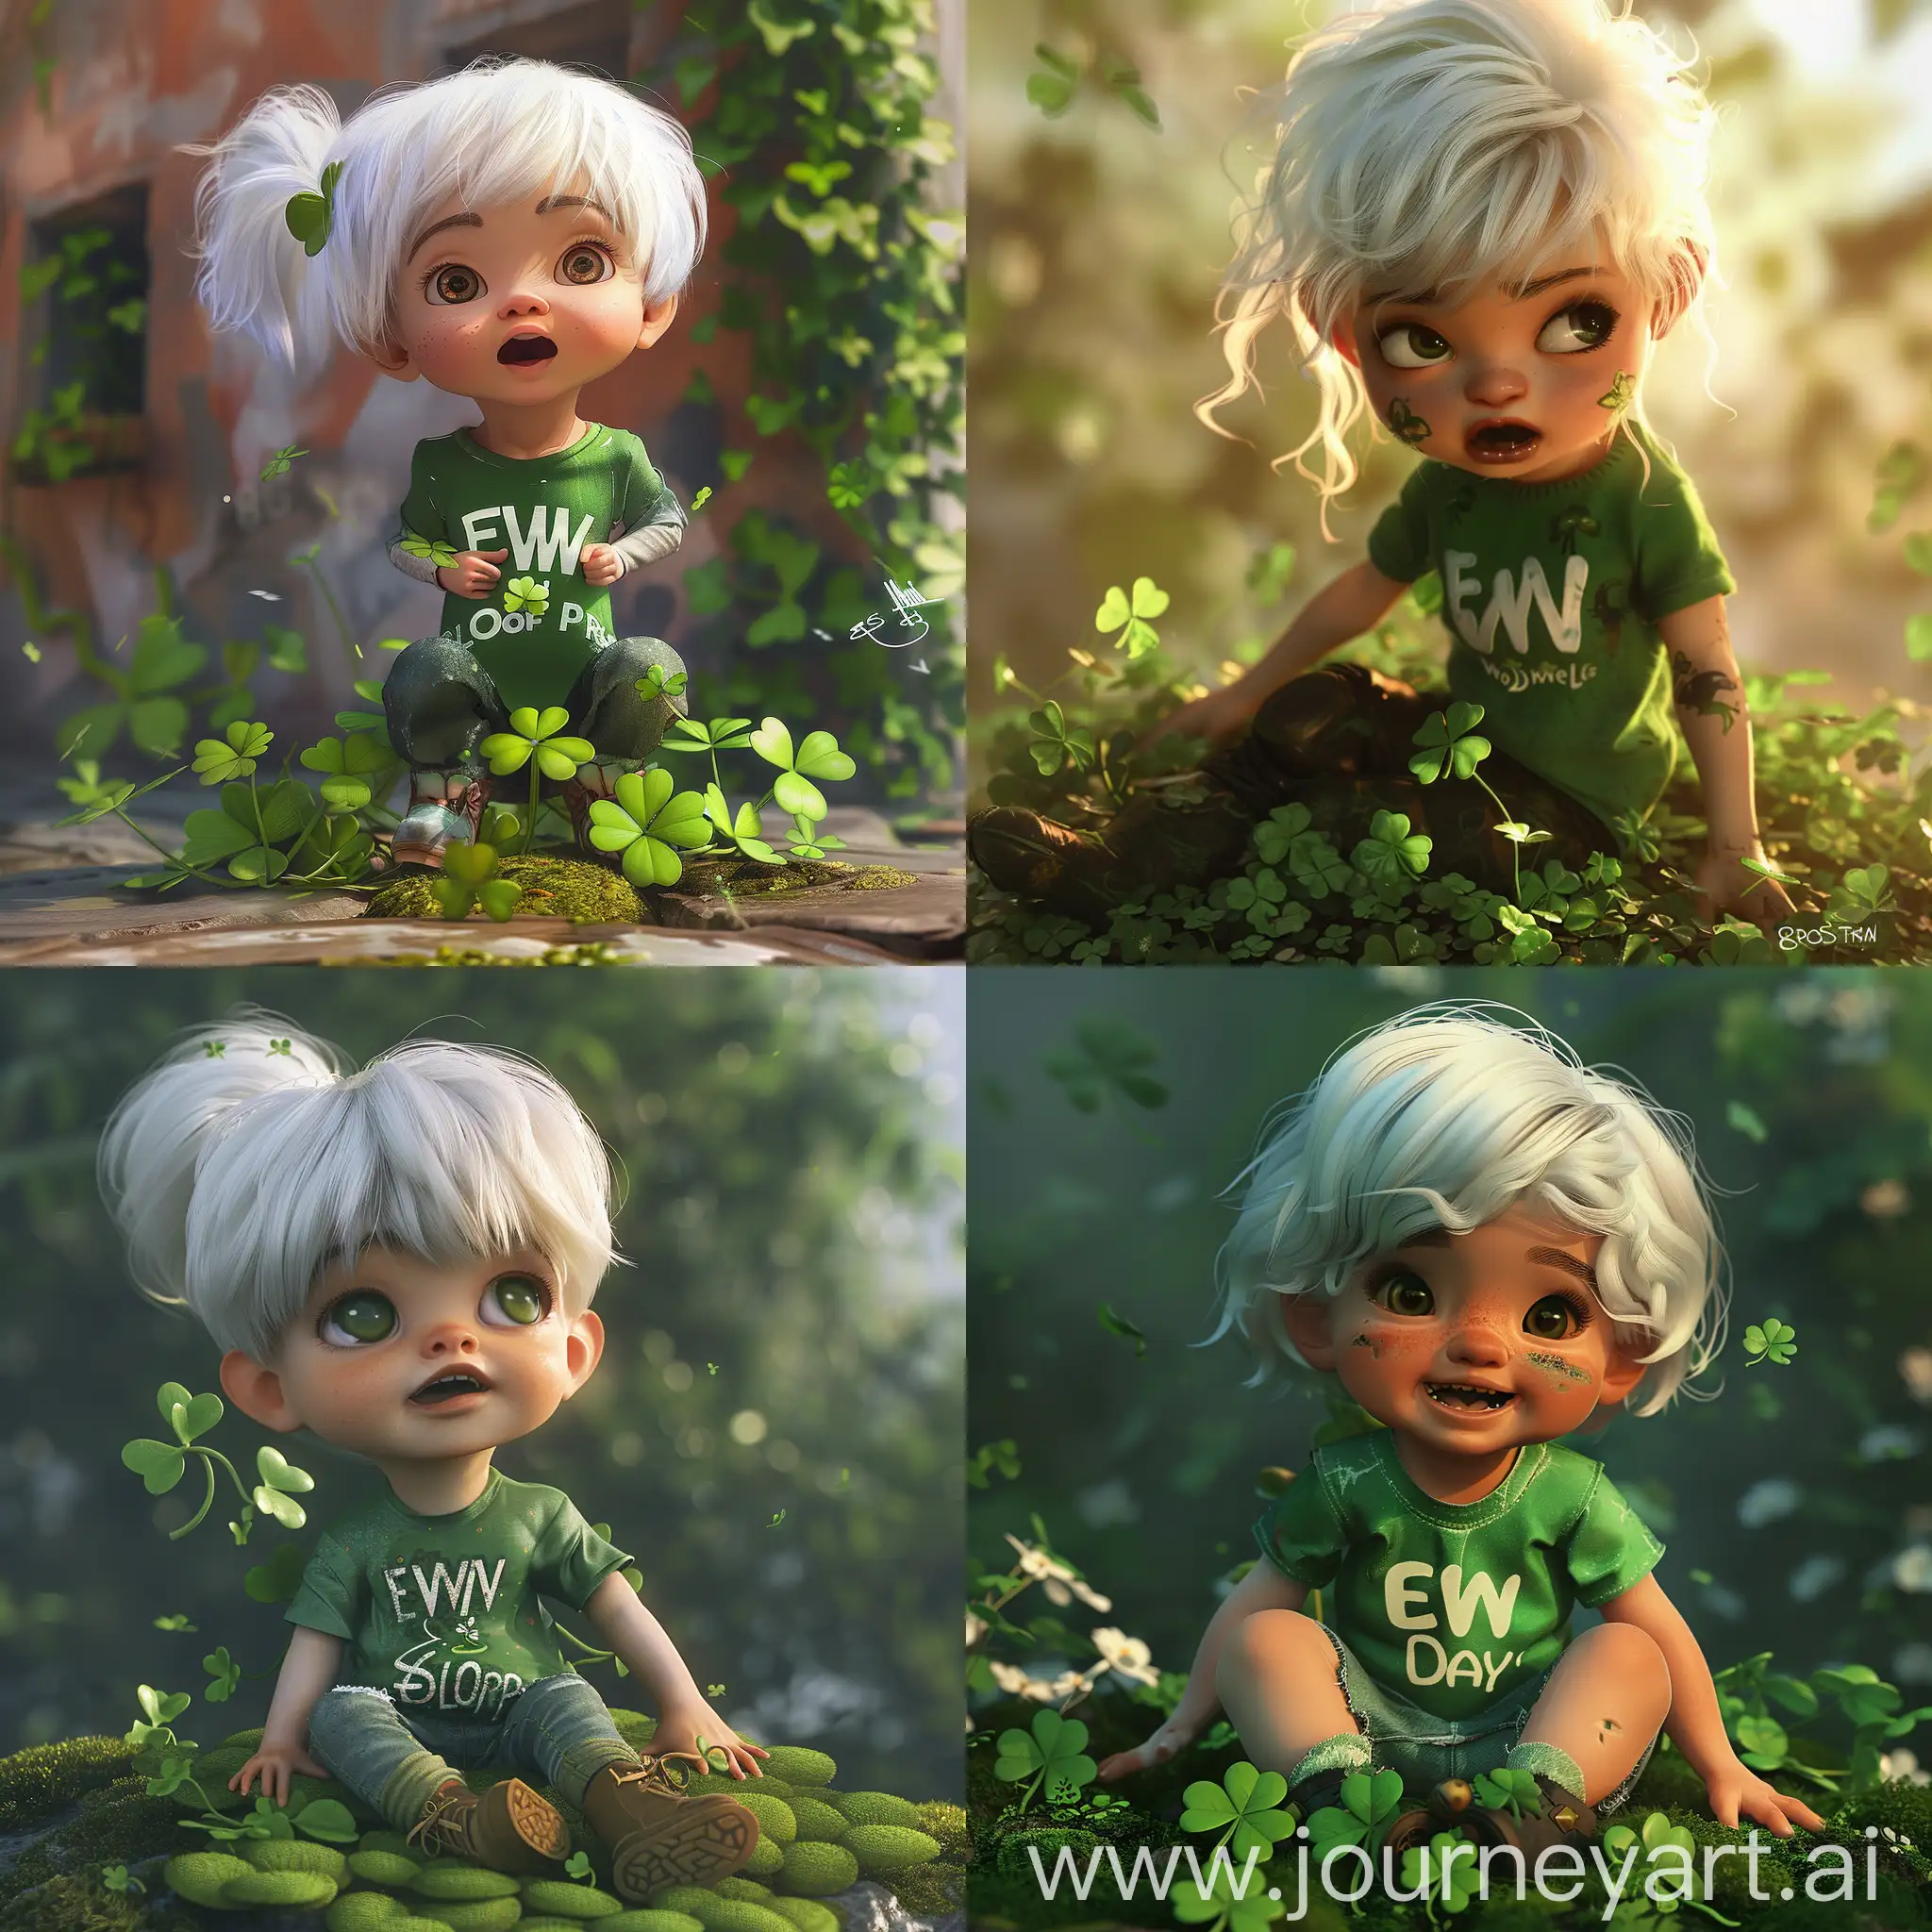 a cute little girl with white hair and a green shirt with the insription "EWW"  sits on a clover and celebrate St. Patricks Day, clover particles, deviantart artstation cgscosiety, artgerm julie bell beeple, wojtek fus, beeple and jeremiah ketner, cgsociety contest winner, ross tran and wlop, ross tran 8 k, ultra realistic concept art, fantasy art behance, moebius + loish + wlop